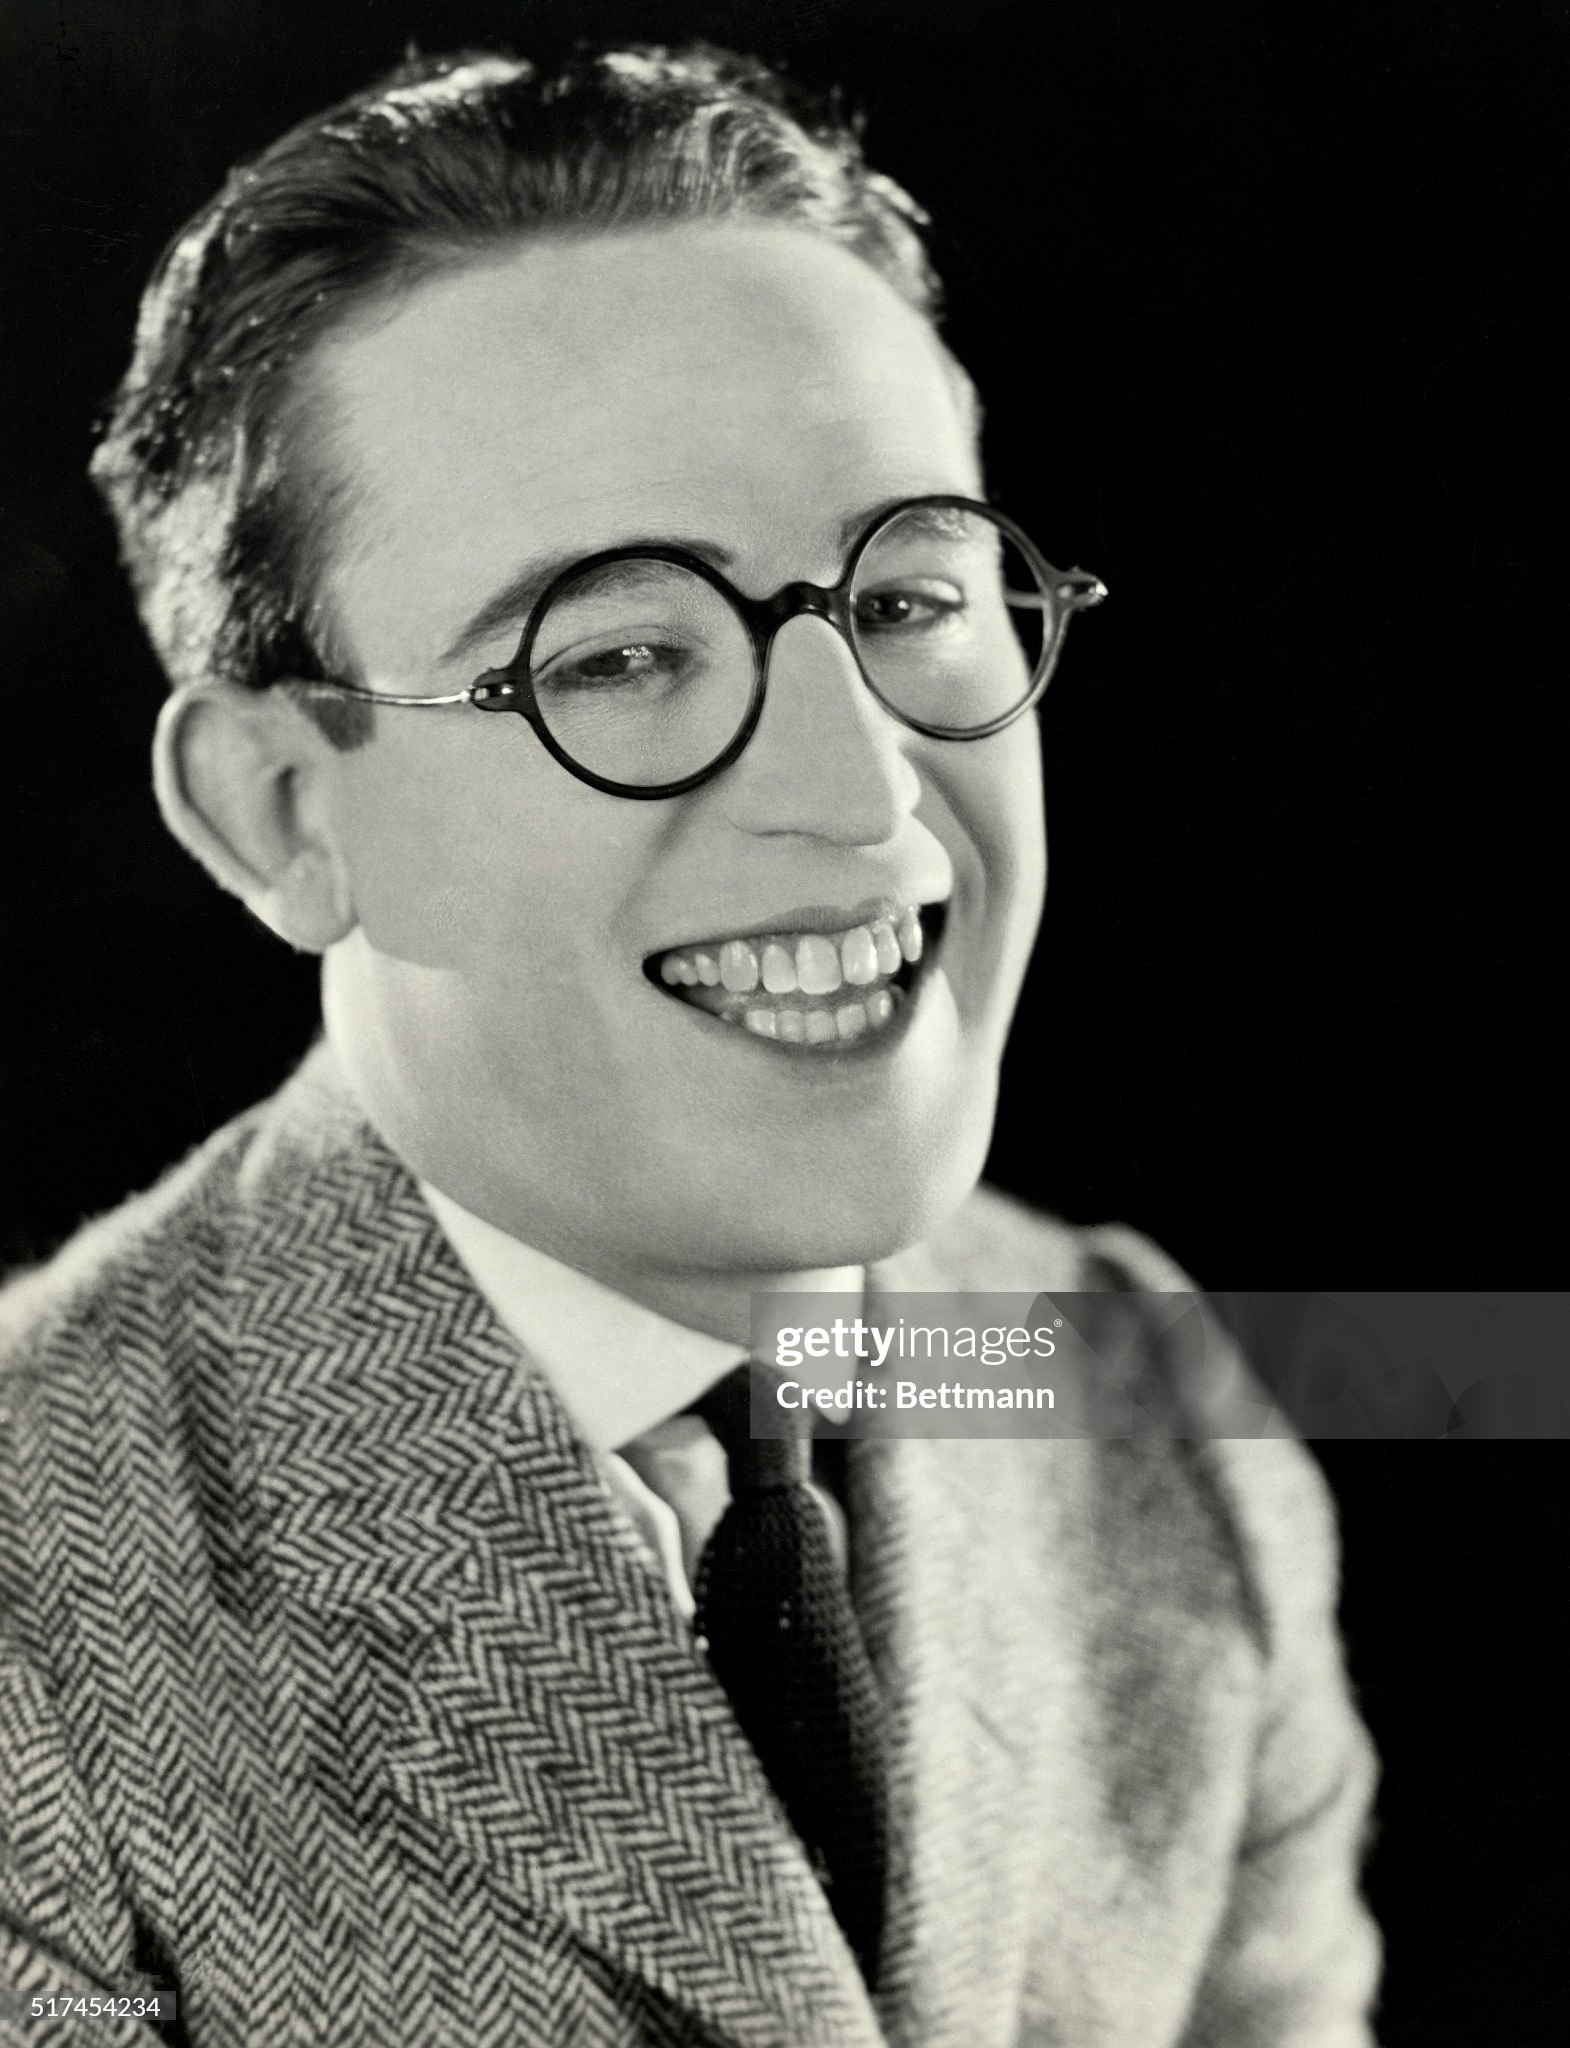 ¿Cuánto mide Harold Lloyd? - Altura - Real height Picture-shows-american-film-actor-harold-lloyd-who-stars-in-the-movie-dr-jack-undated-photo